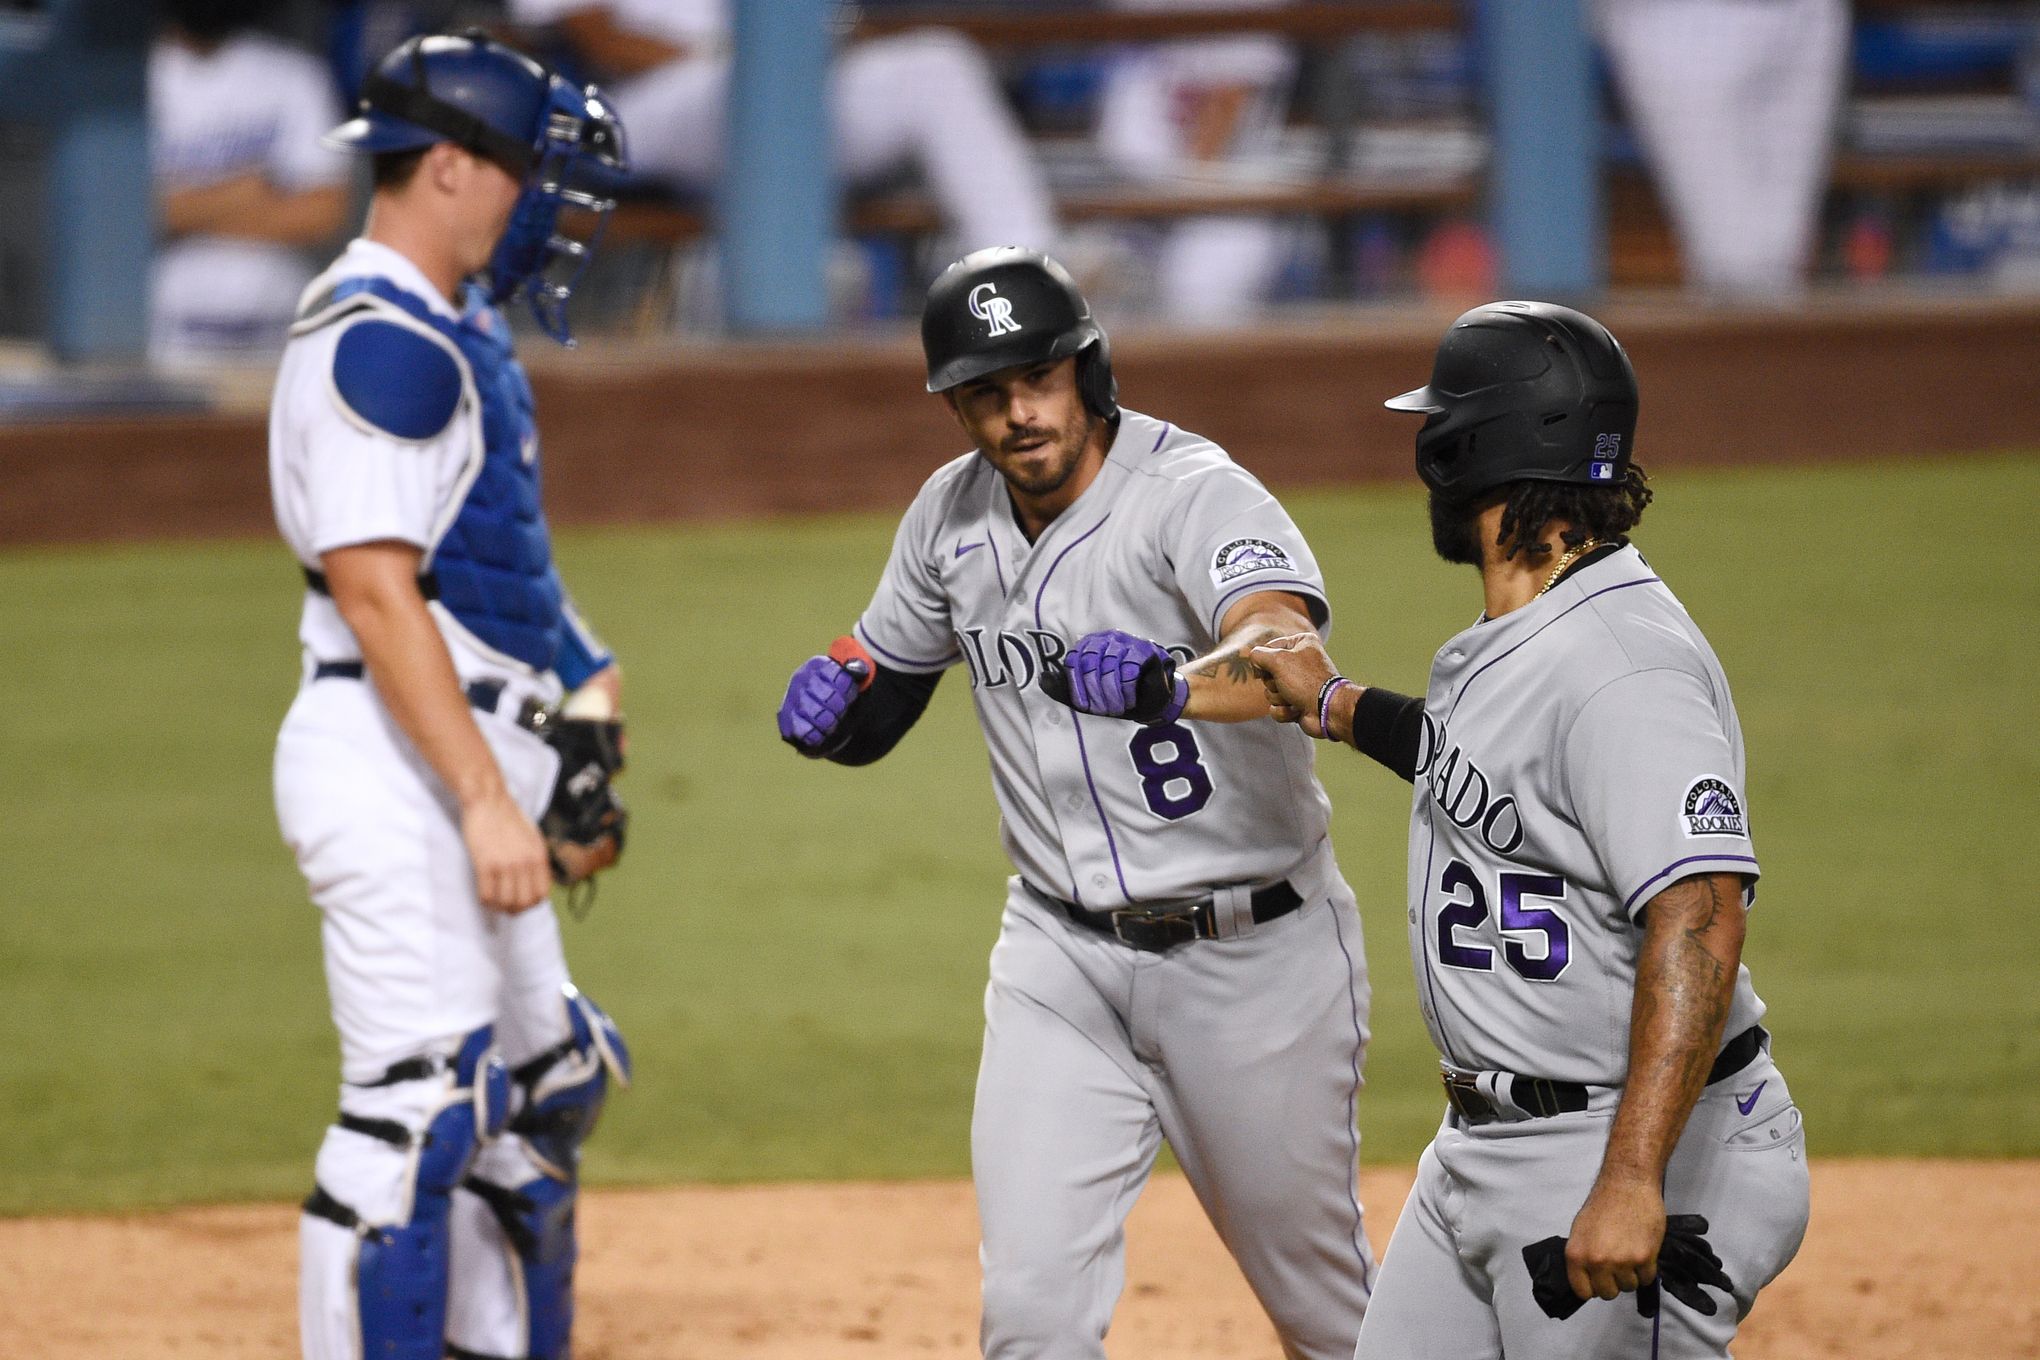 Rockies use clutch hitting to down Dodgers